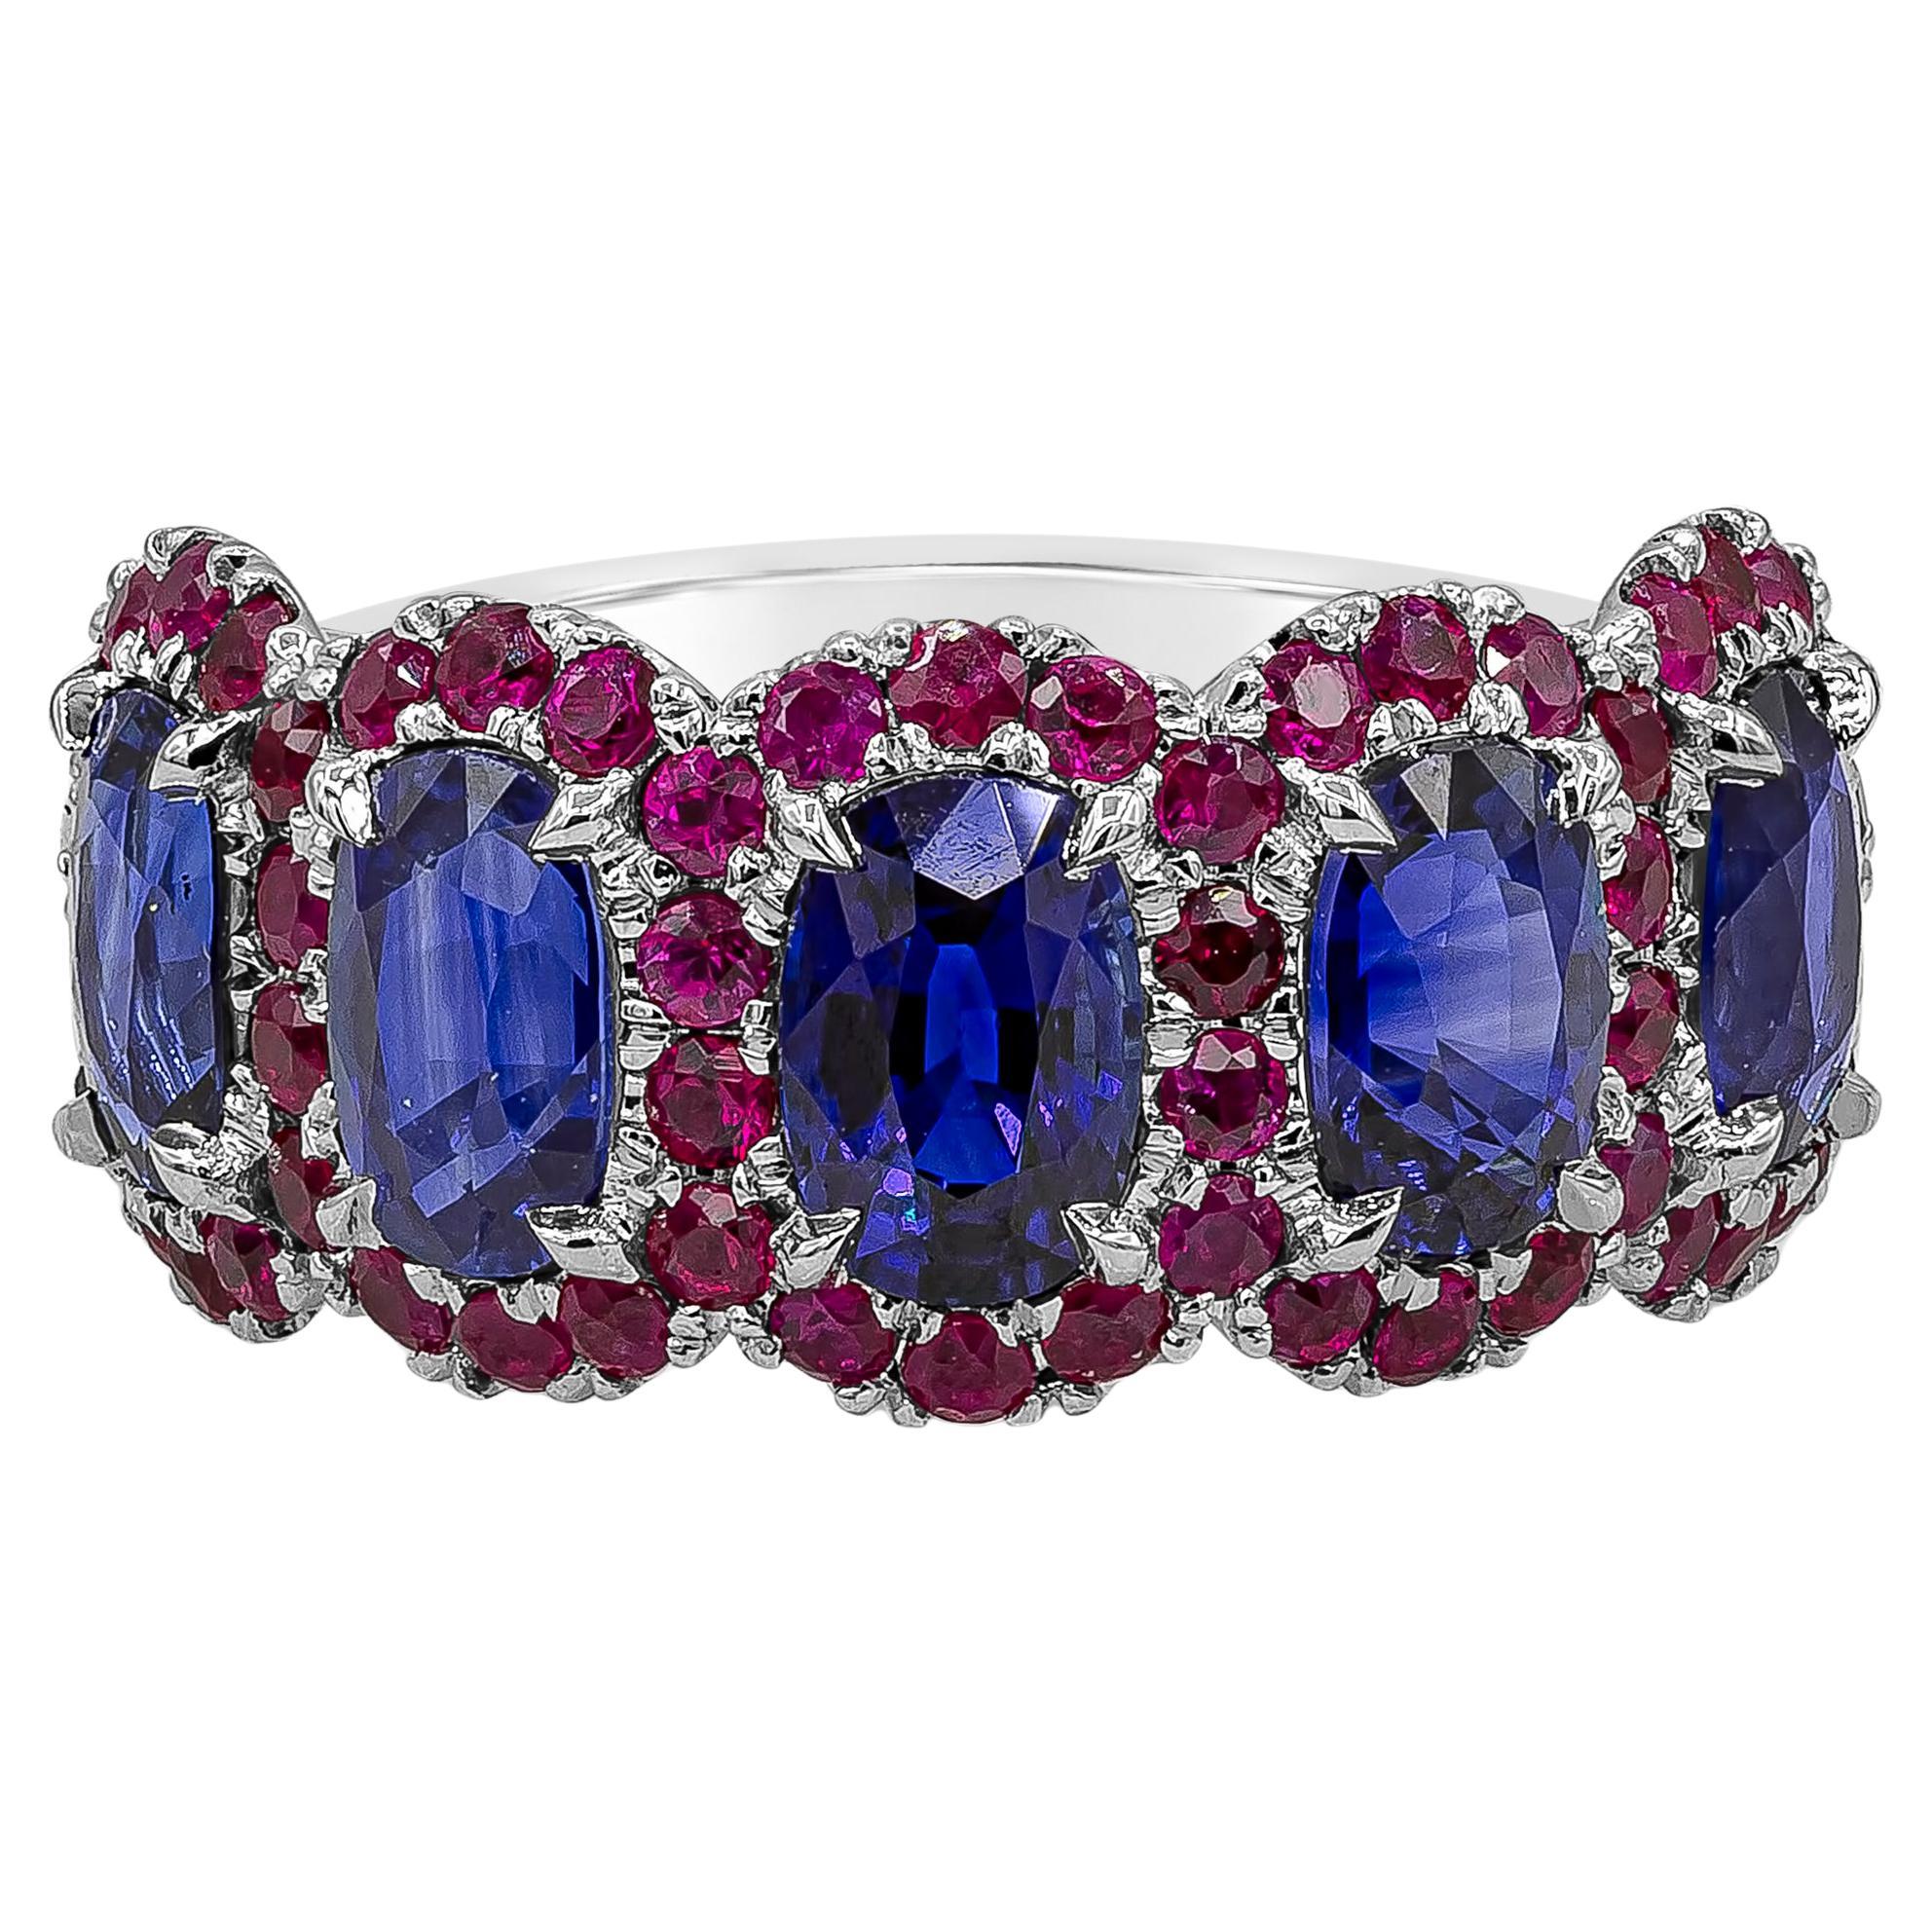 Roman Malakov 4.26 Carats Total Blue Sapphire and Ruby Halo Wedding Band Ring For Sale